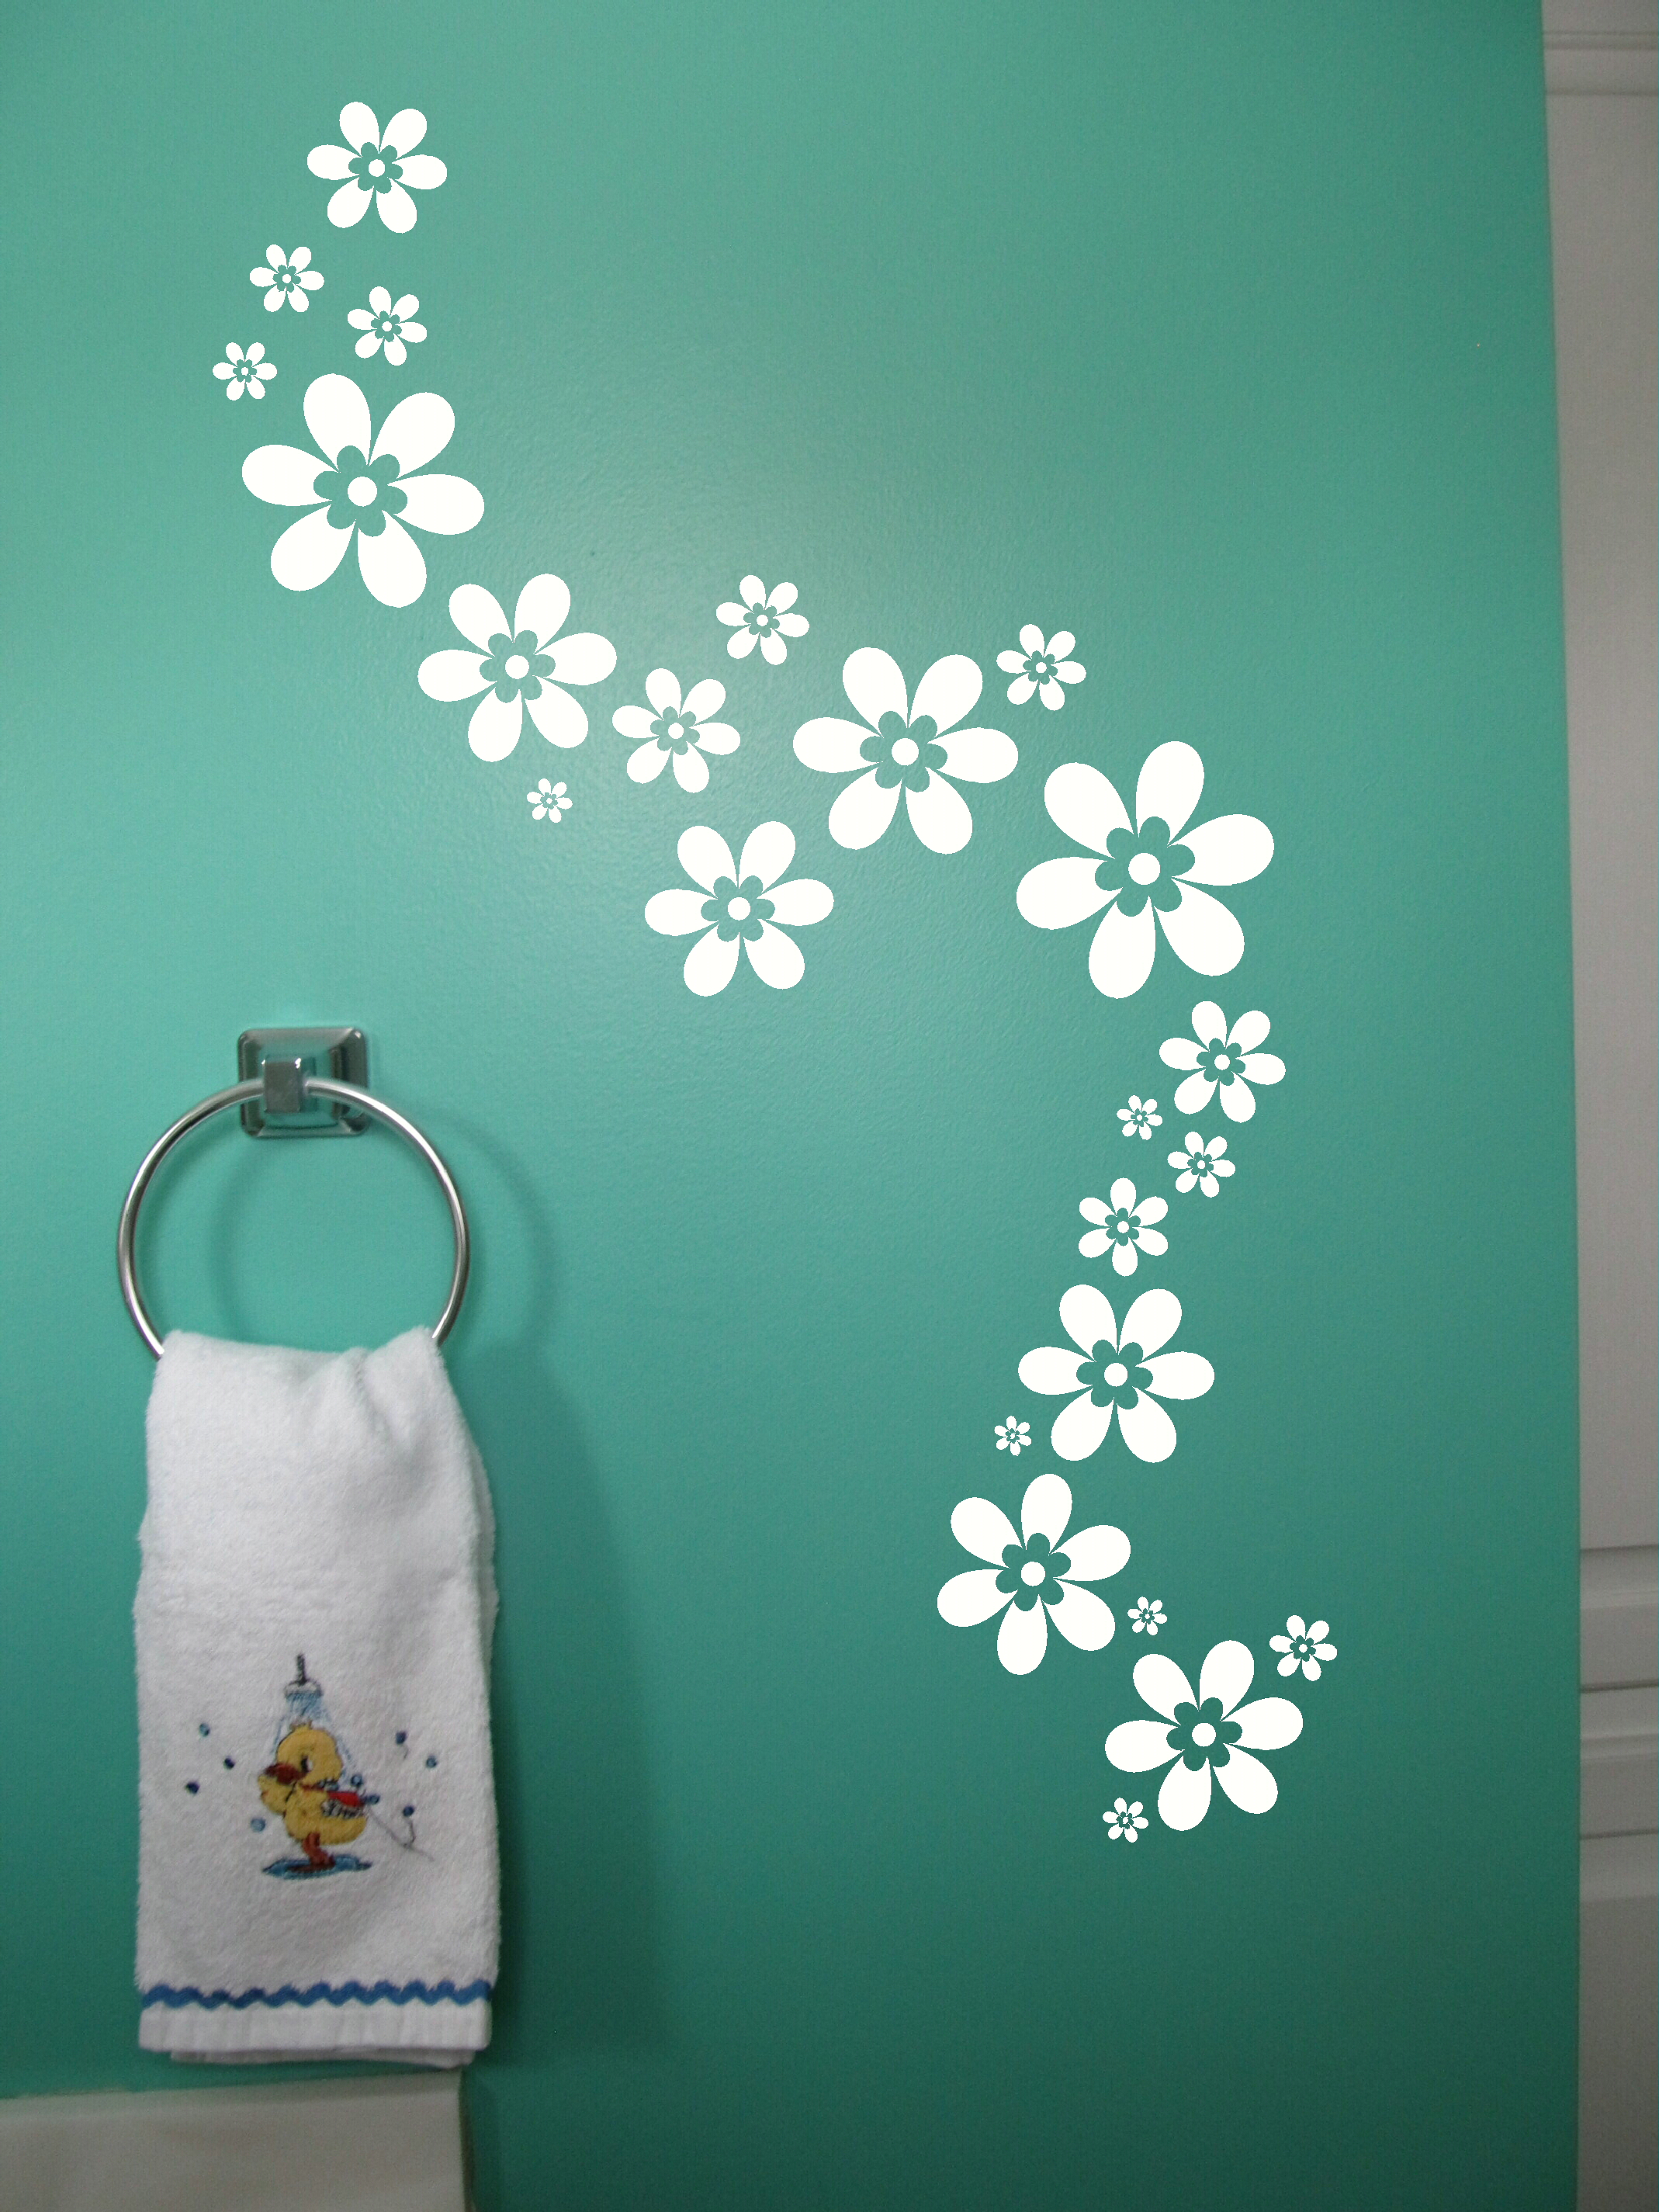 Floral Patterns Wall Decal Sticker Shapes Home Decor